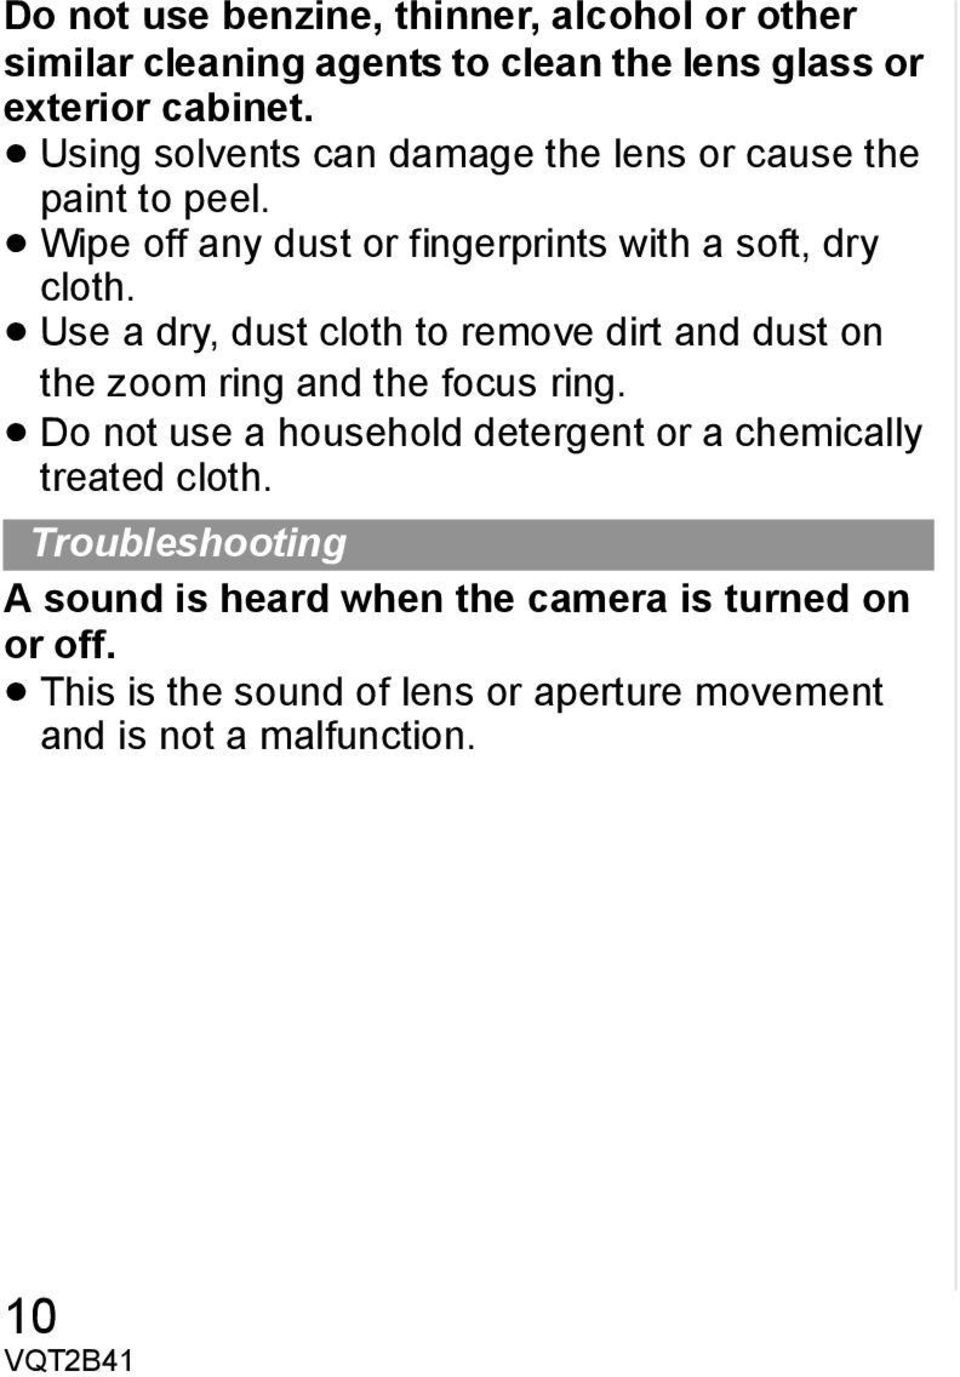 Use a dry, dust cloth to remove dirt and dust on the zoom ring and the focus ring.